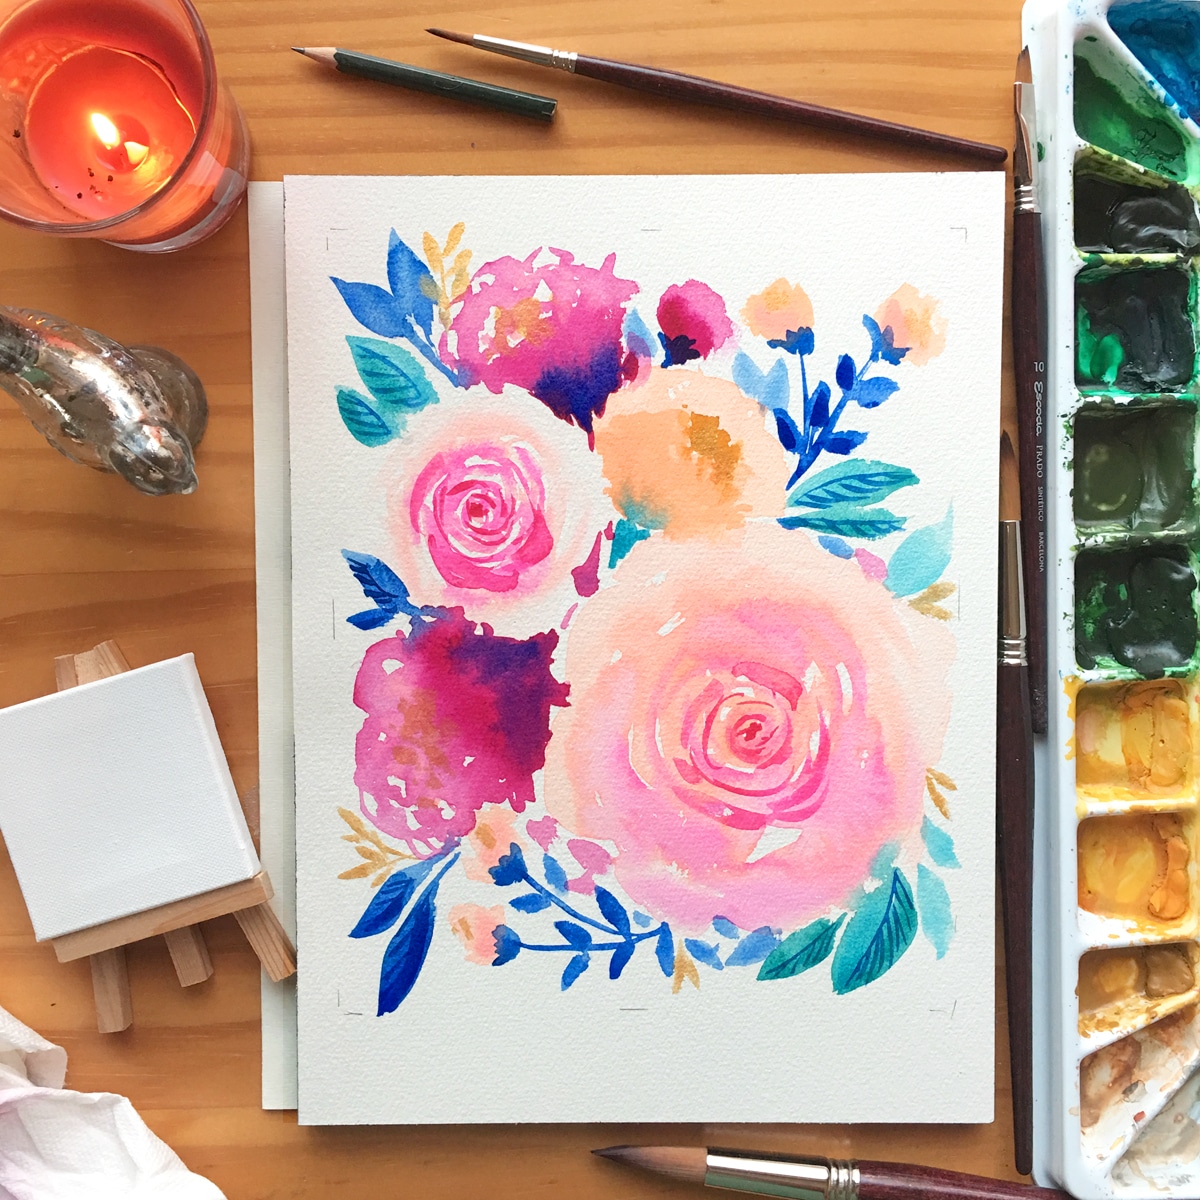 Original colorful flower painting with watercolor florals by artist Michelle Mospens. - Mospens Studio